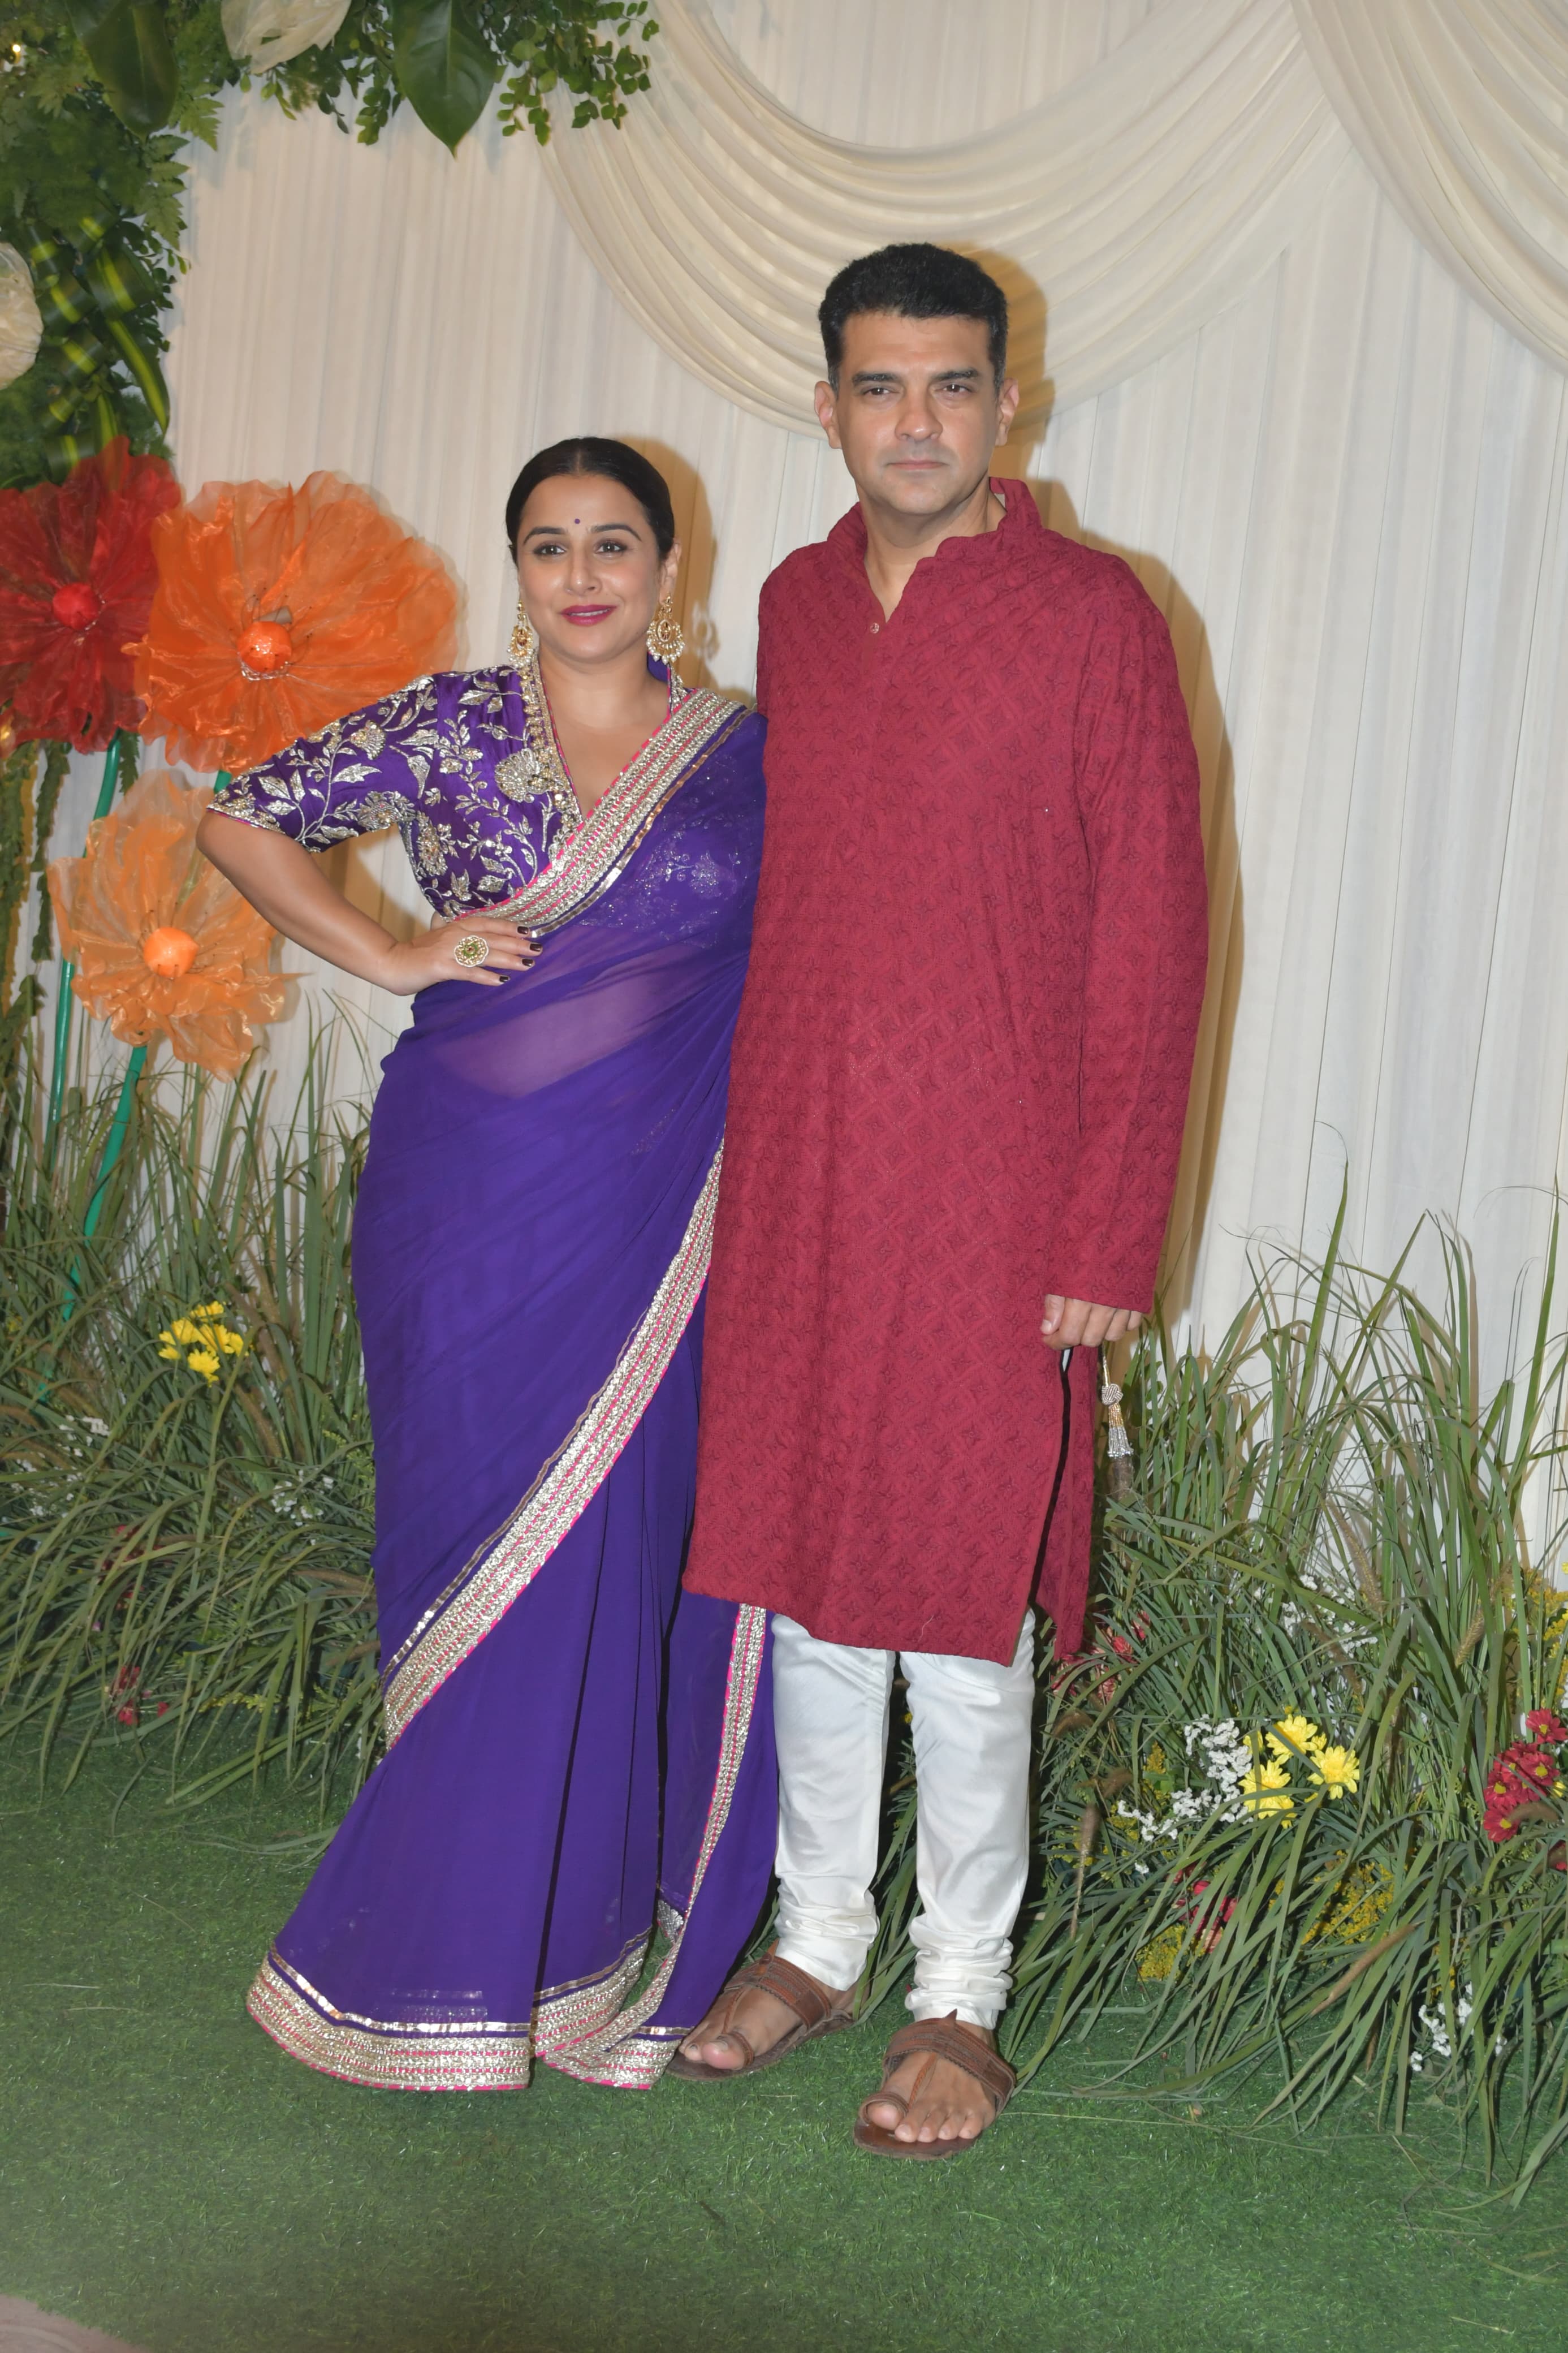 Vidya Balan was also present at the event. The actress opted for a blue saree paired with embroidered blouse 